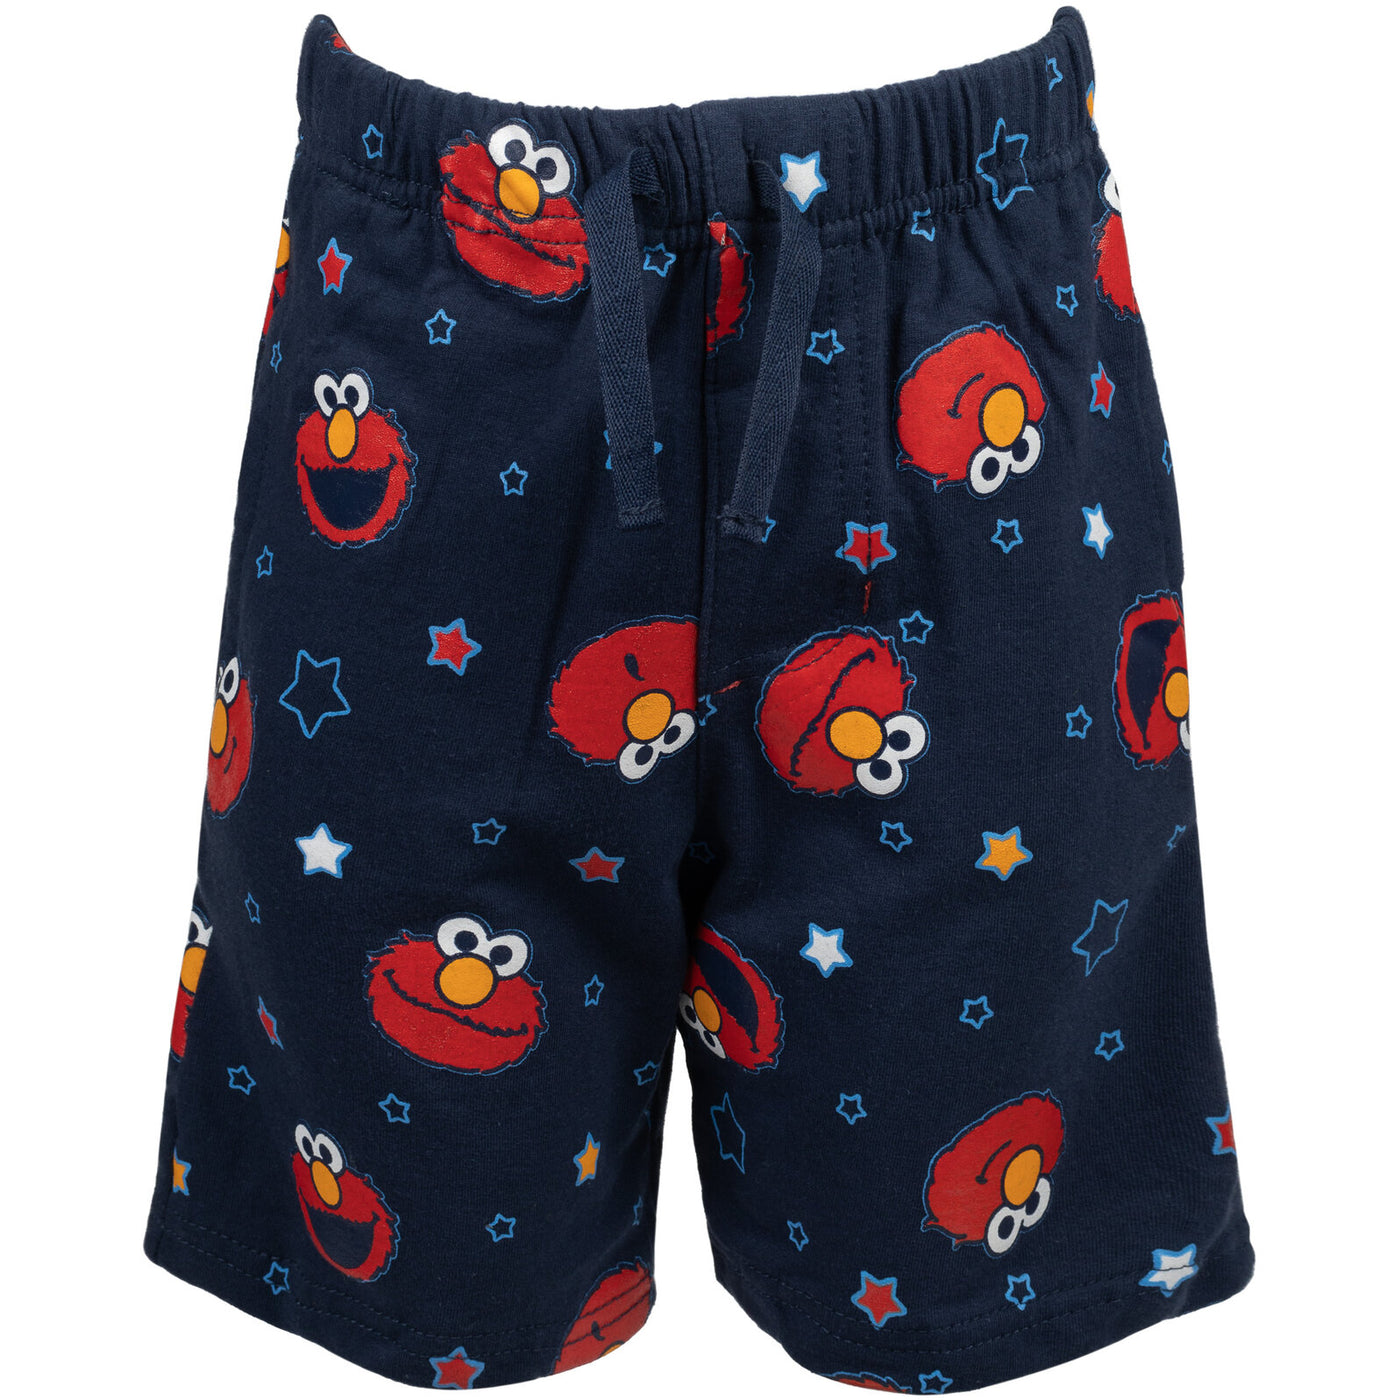 Sesame Street Elmo T-Shirt and French Terry Shorts Outfit Set